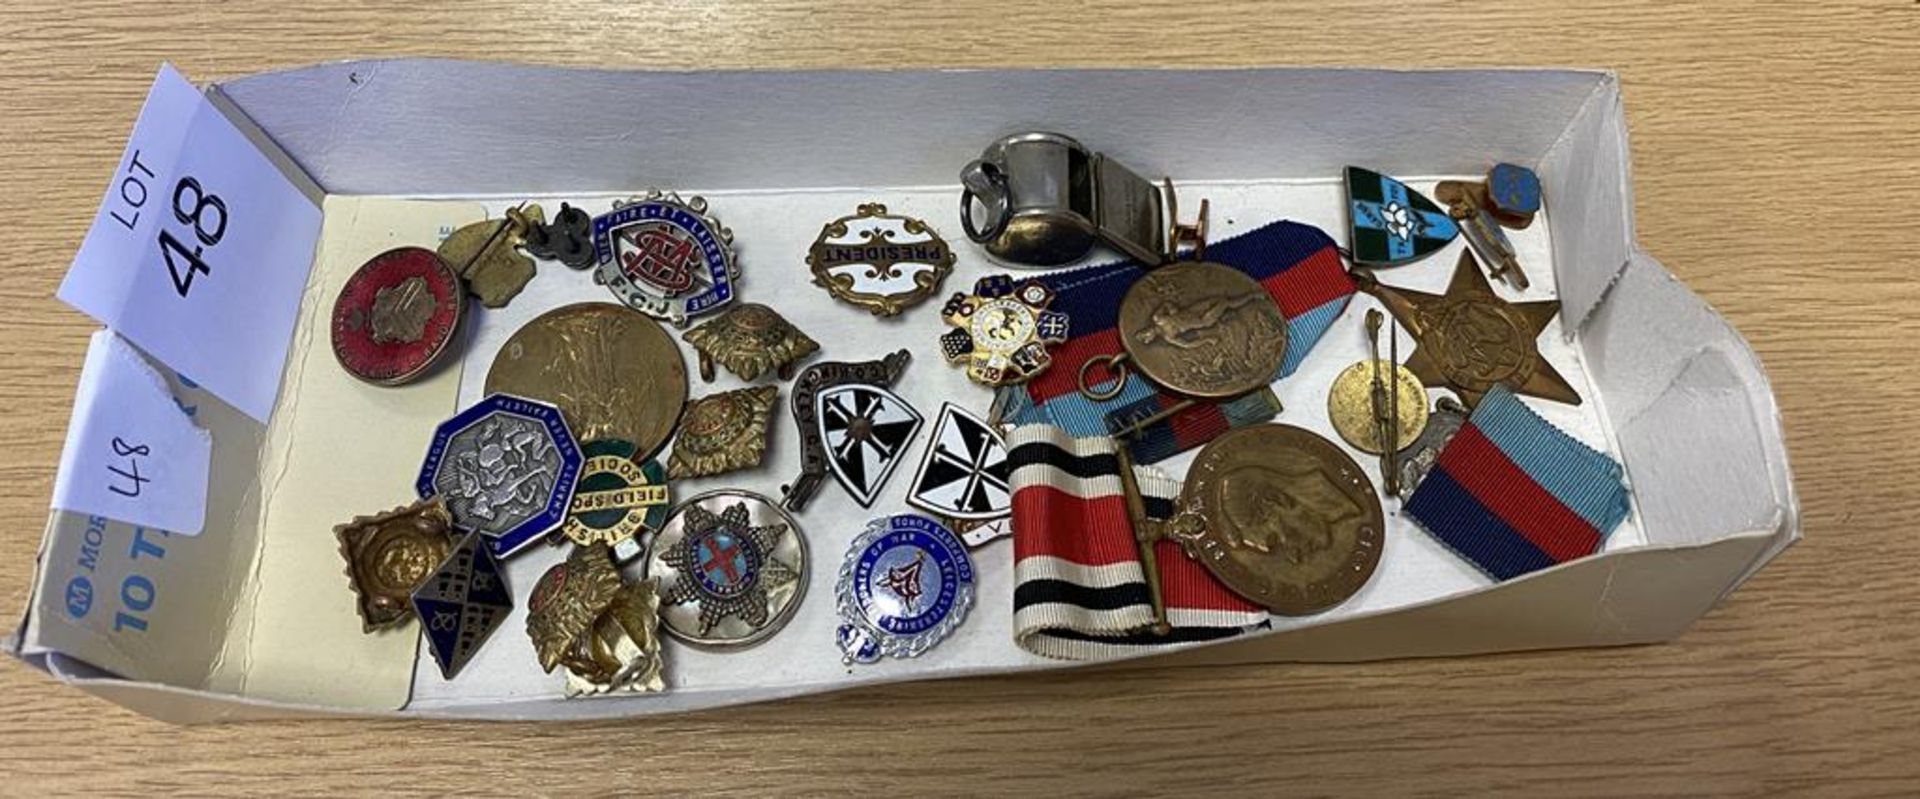 Interesting Collection of Enamelled Badges, Special Constables and Military Medals etc - Image 2 of 7